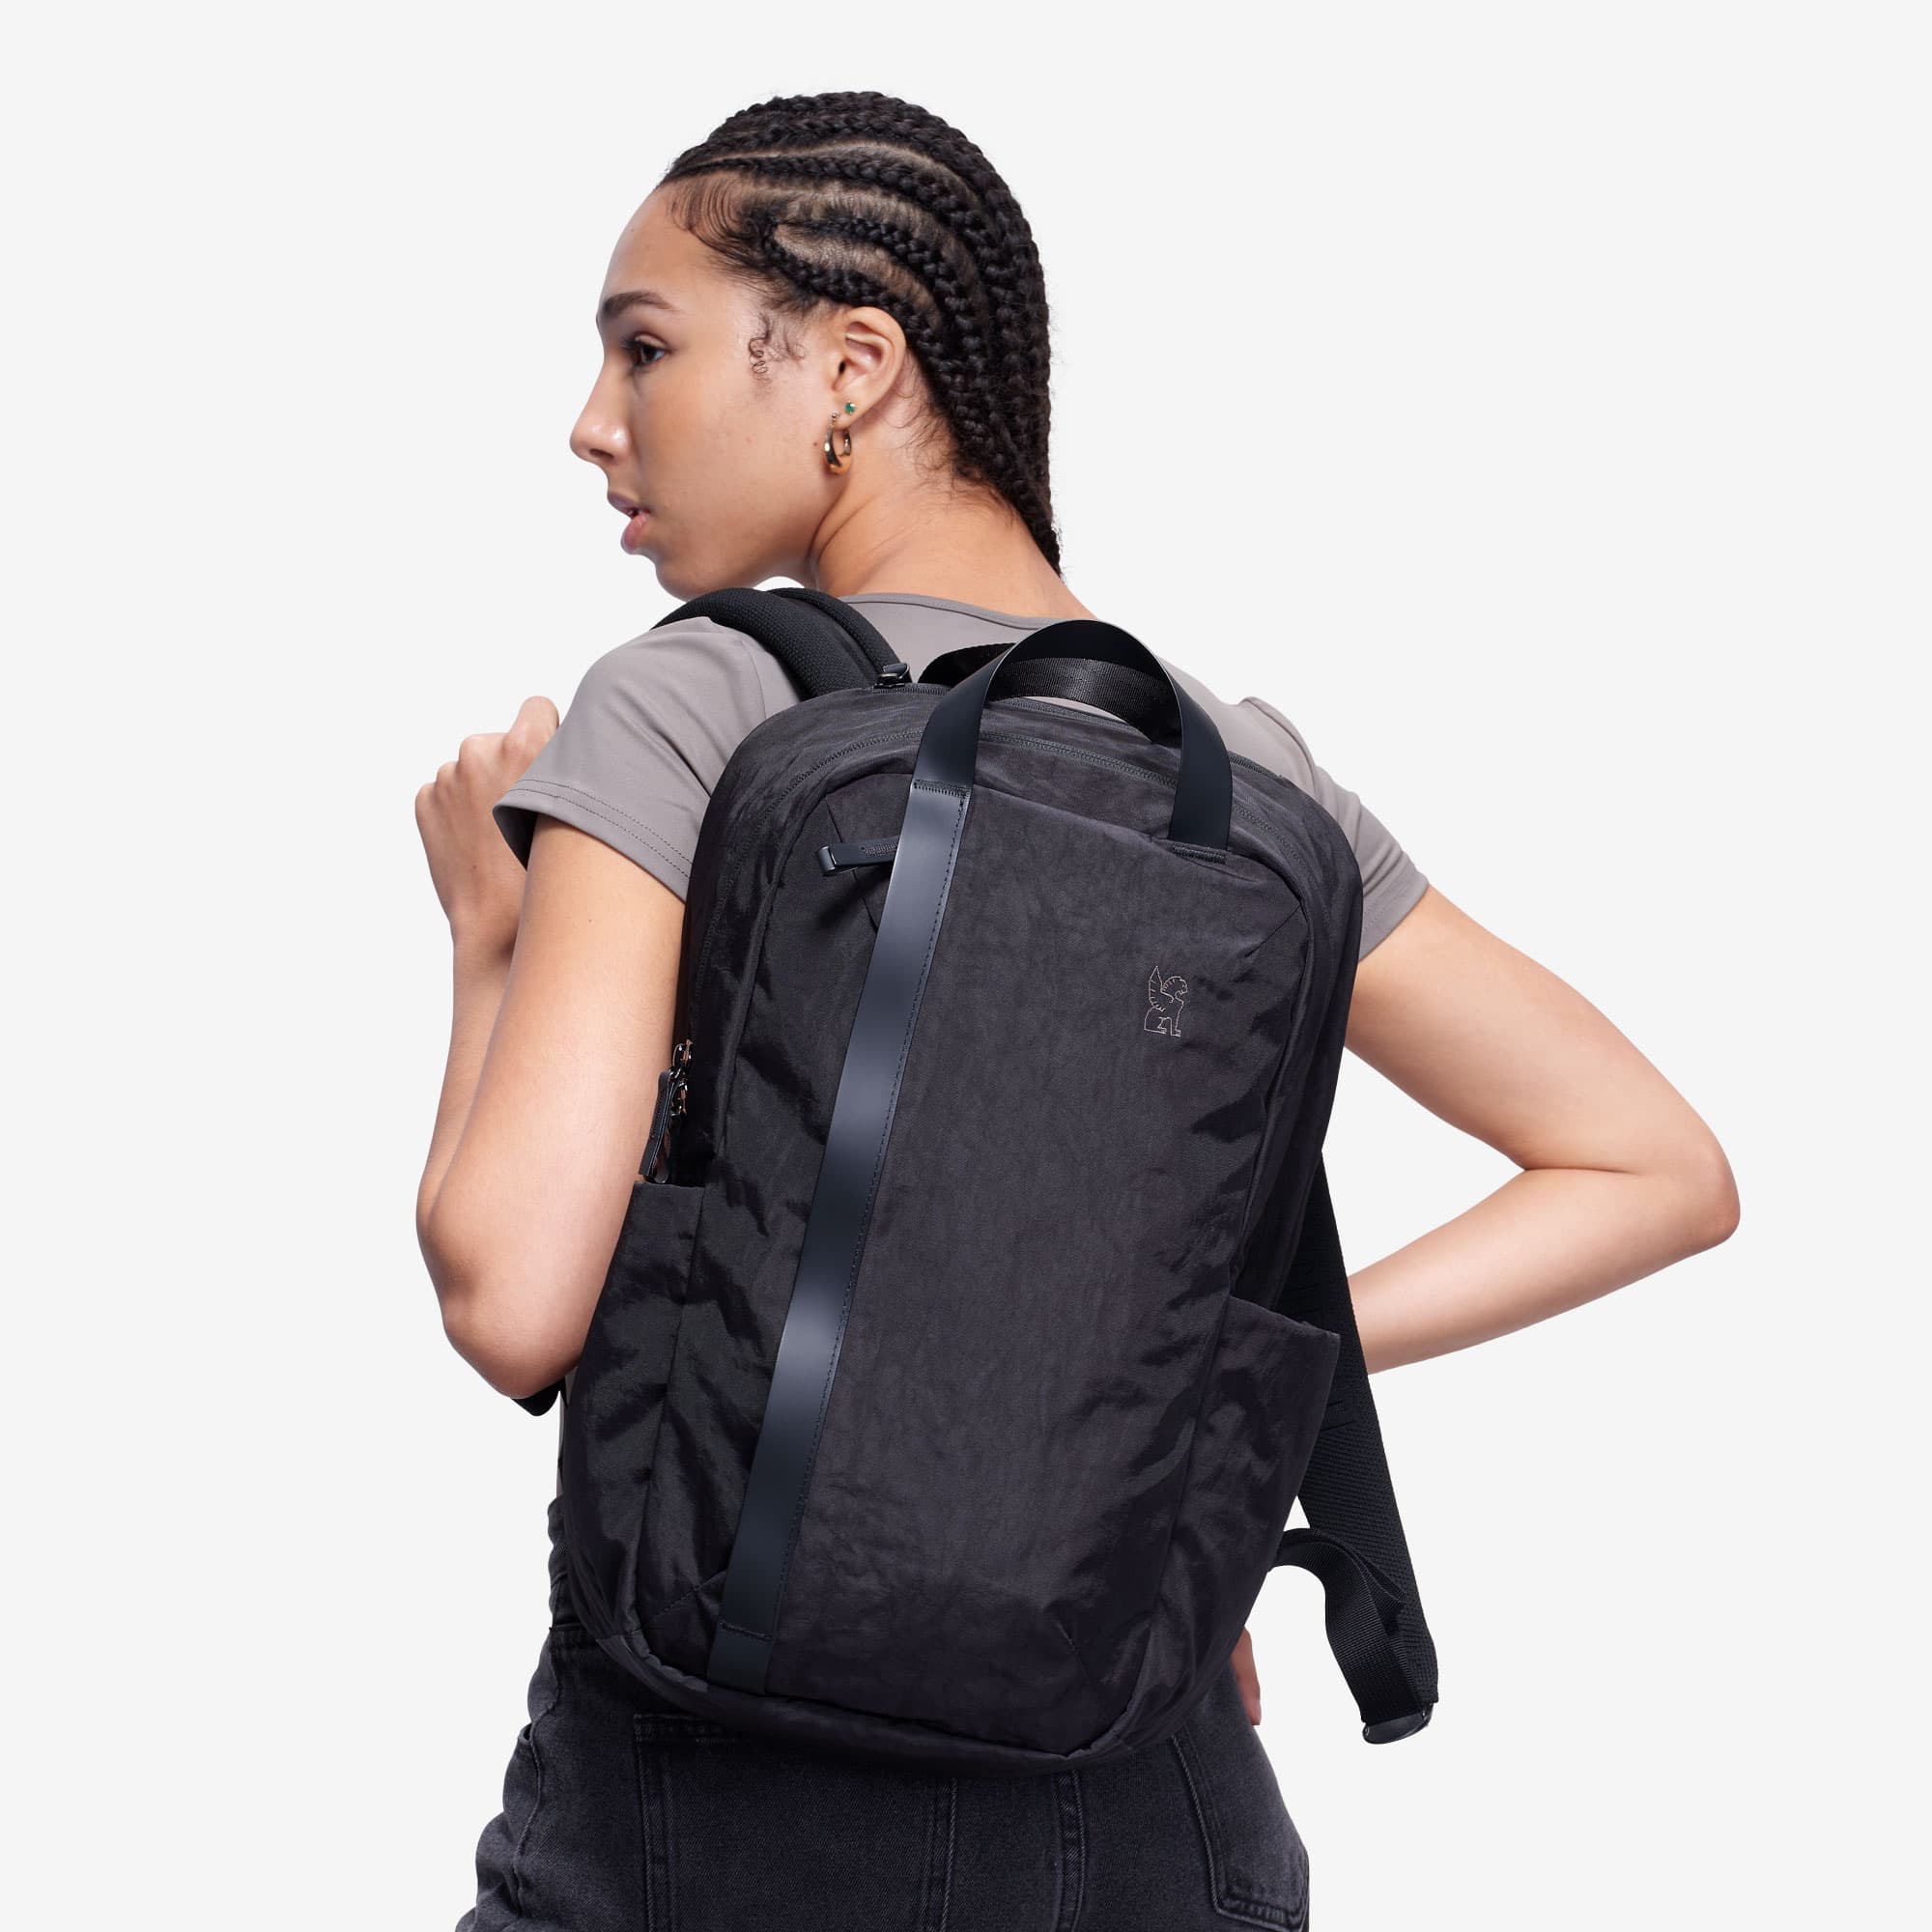 Highline backpack worn by a woman